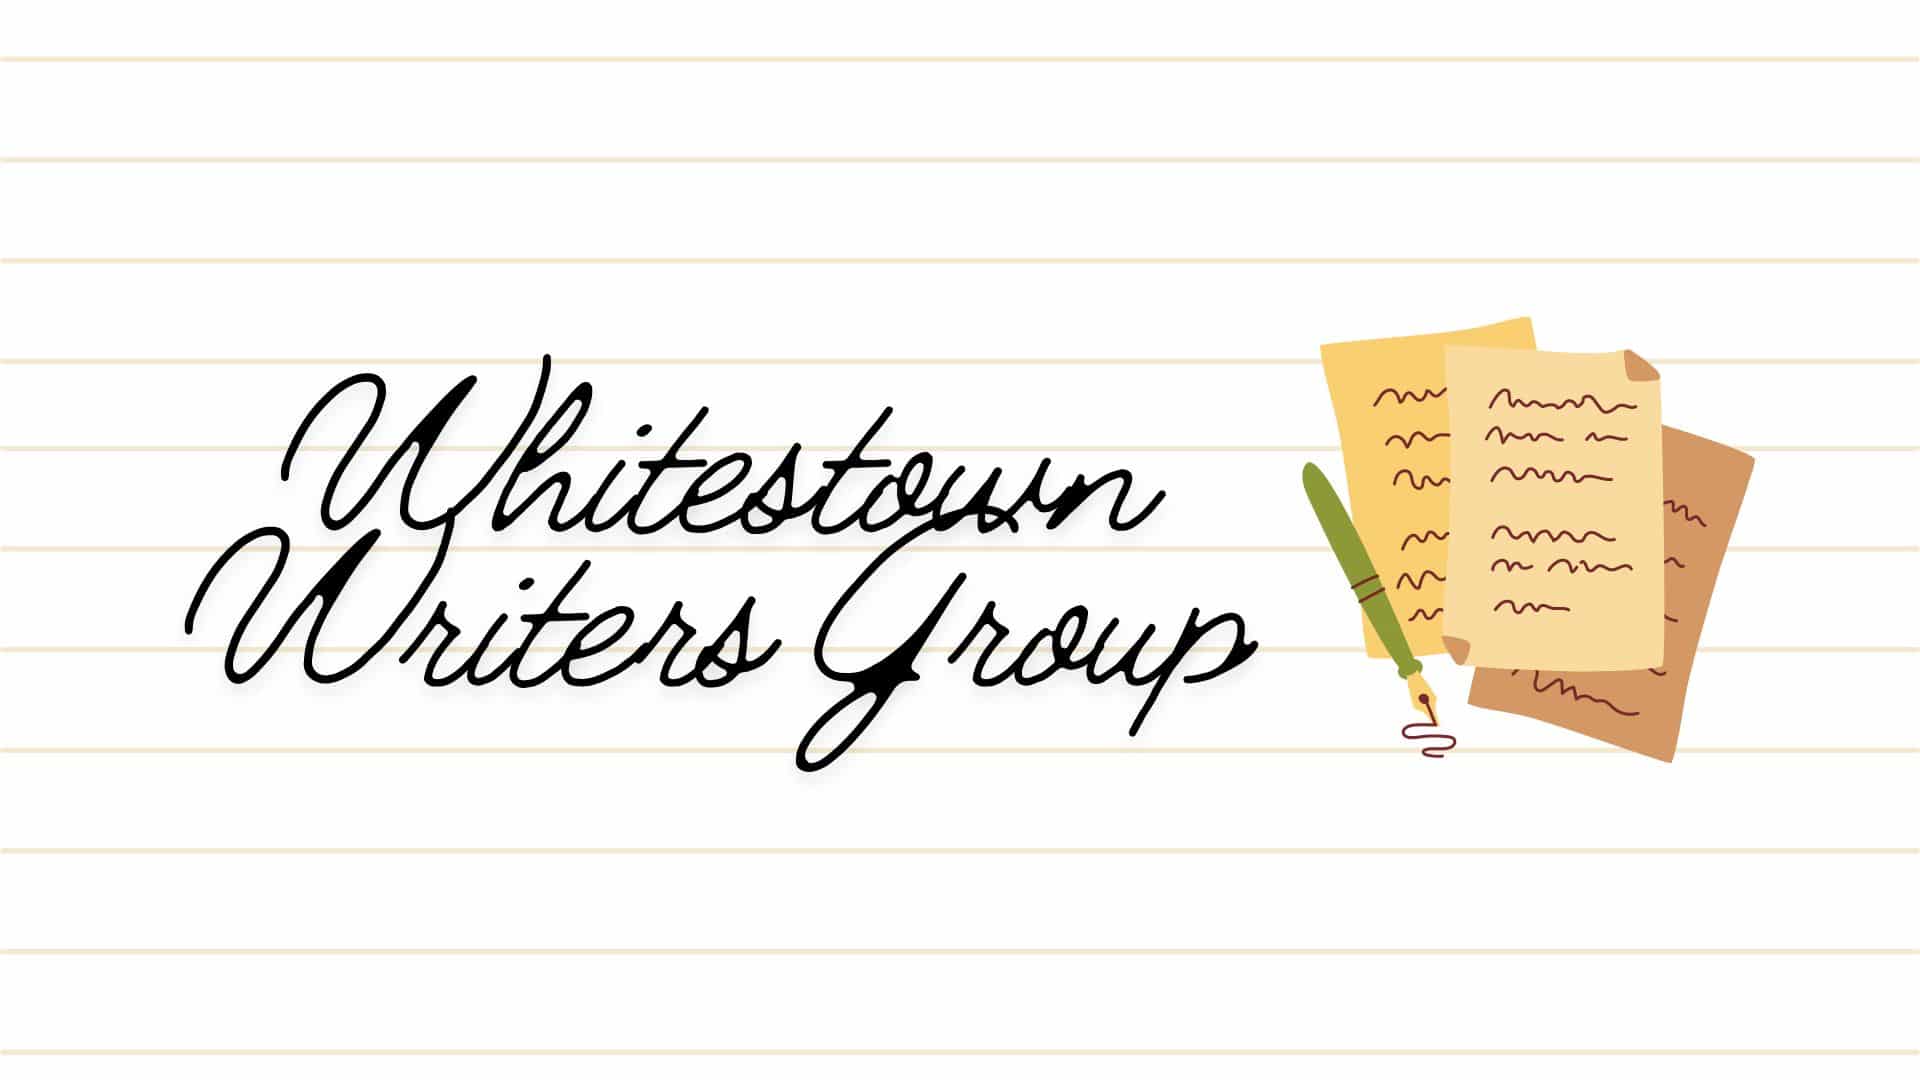 Writers Group on lined paper image